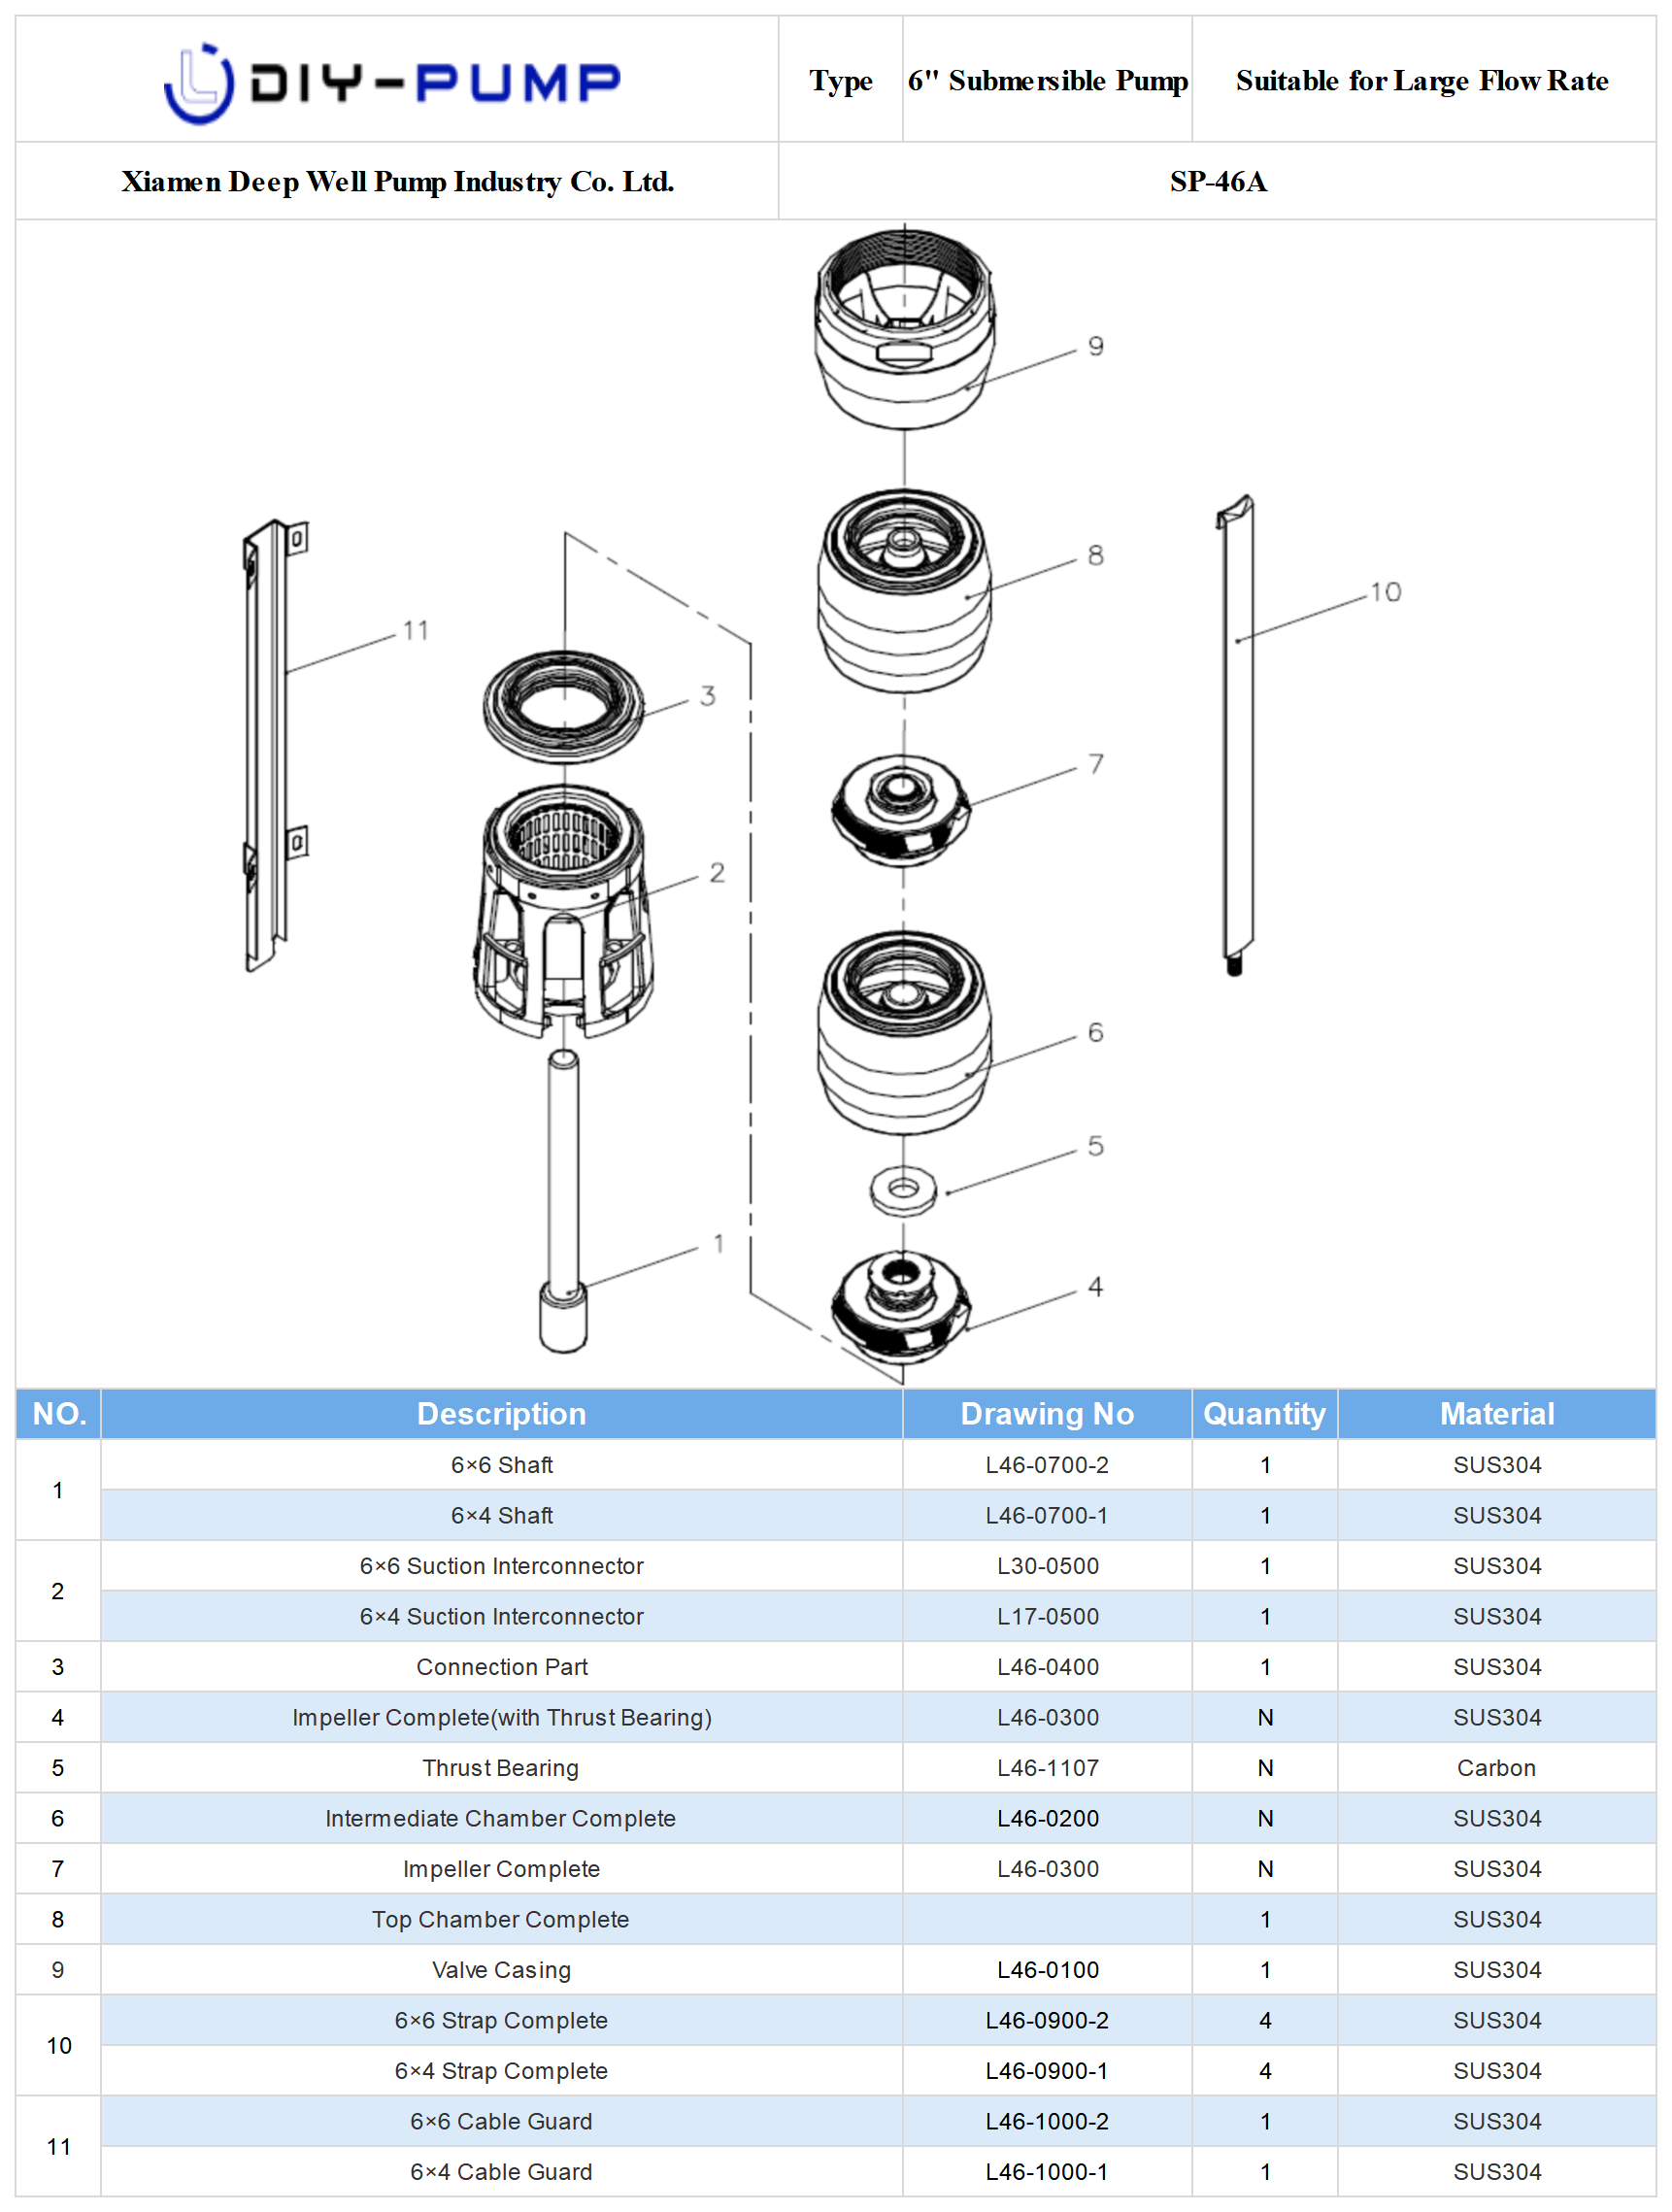 SP-46 Deep Well Submersible Pump Structure.png